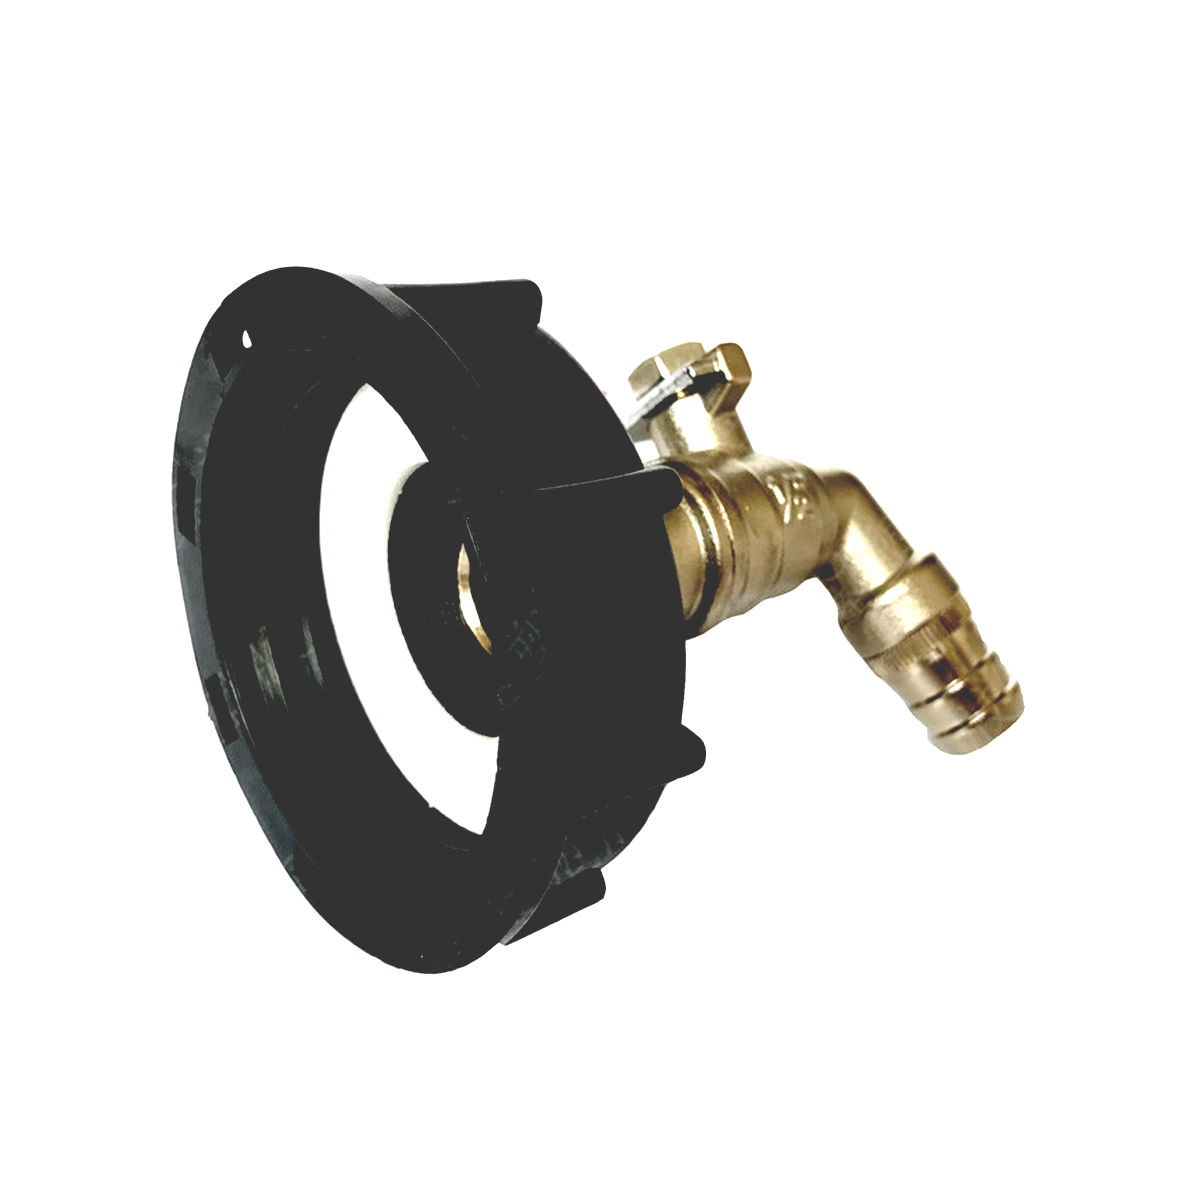 S60x6-IBC-Faucet-Tank-Drain-Coarse-Thread-Adapter-to-12-Brass-Garden-Outlet-Tap-Connector-Valve-Fitt-1524865